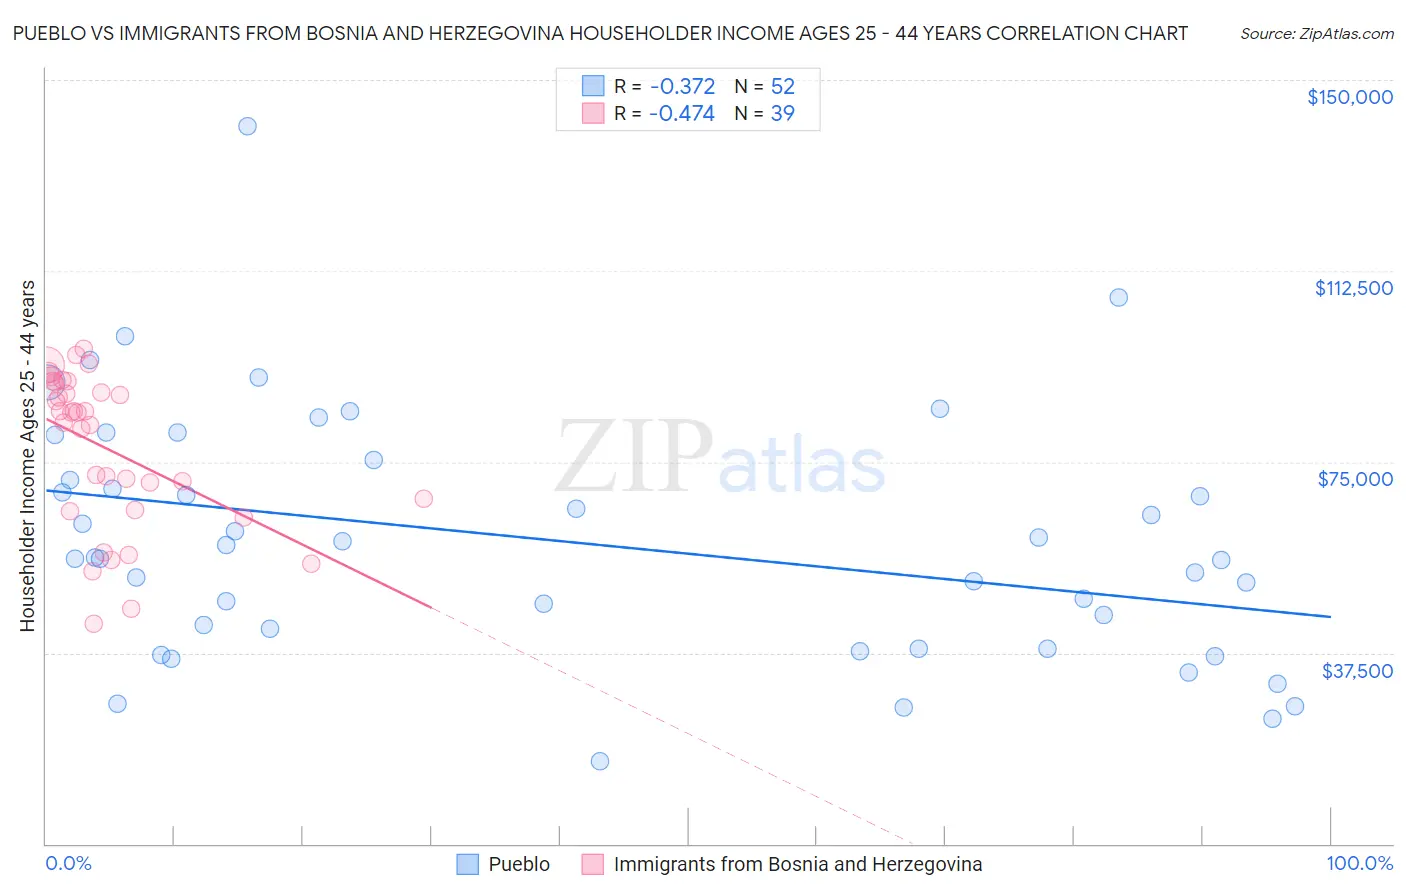 Pueblo vs Immigrants from Bosnia and Herzegovina Householder Income Ages 25 - 44 years